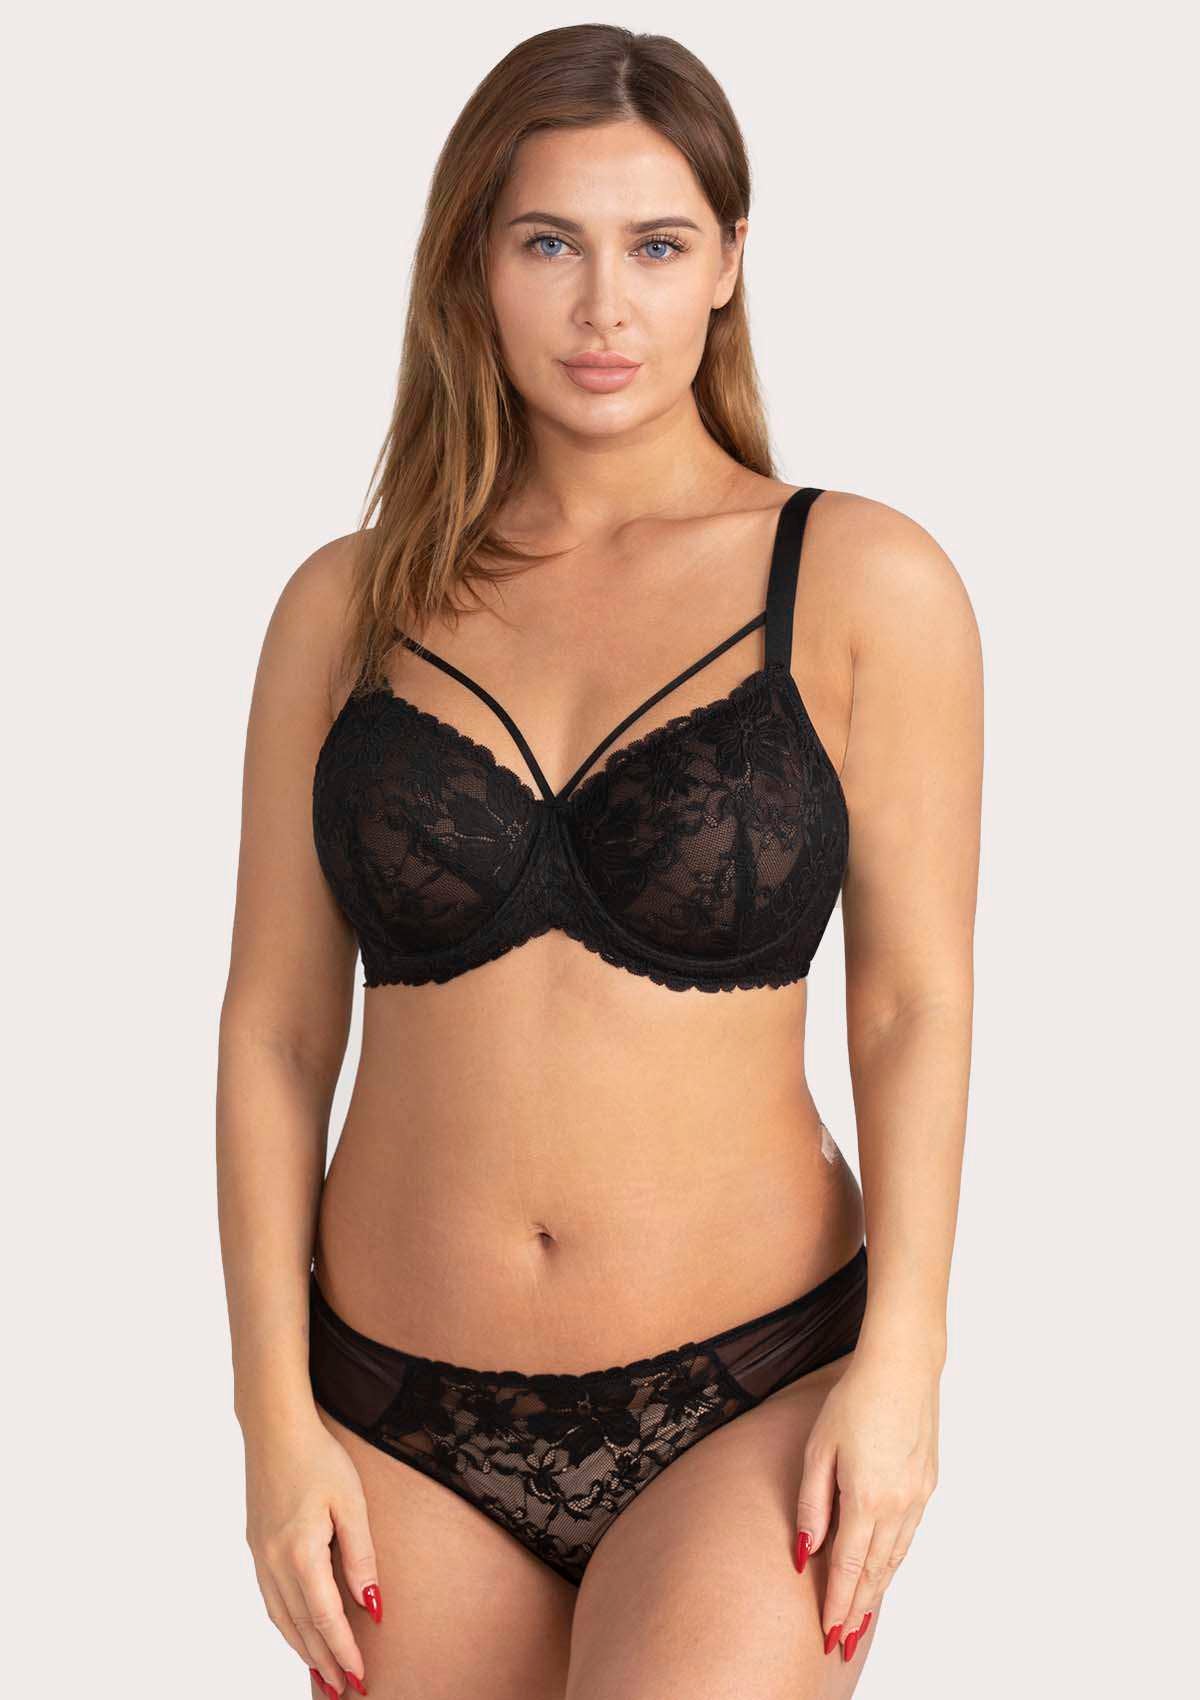 HSIA Pretty In Petals Lace Bra And Panty Set: Non Padded Wired Bra - Black / 40 / C